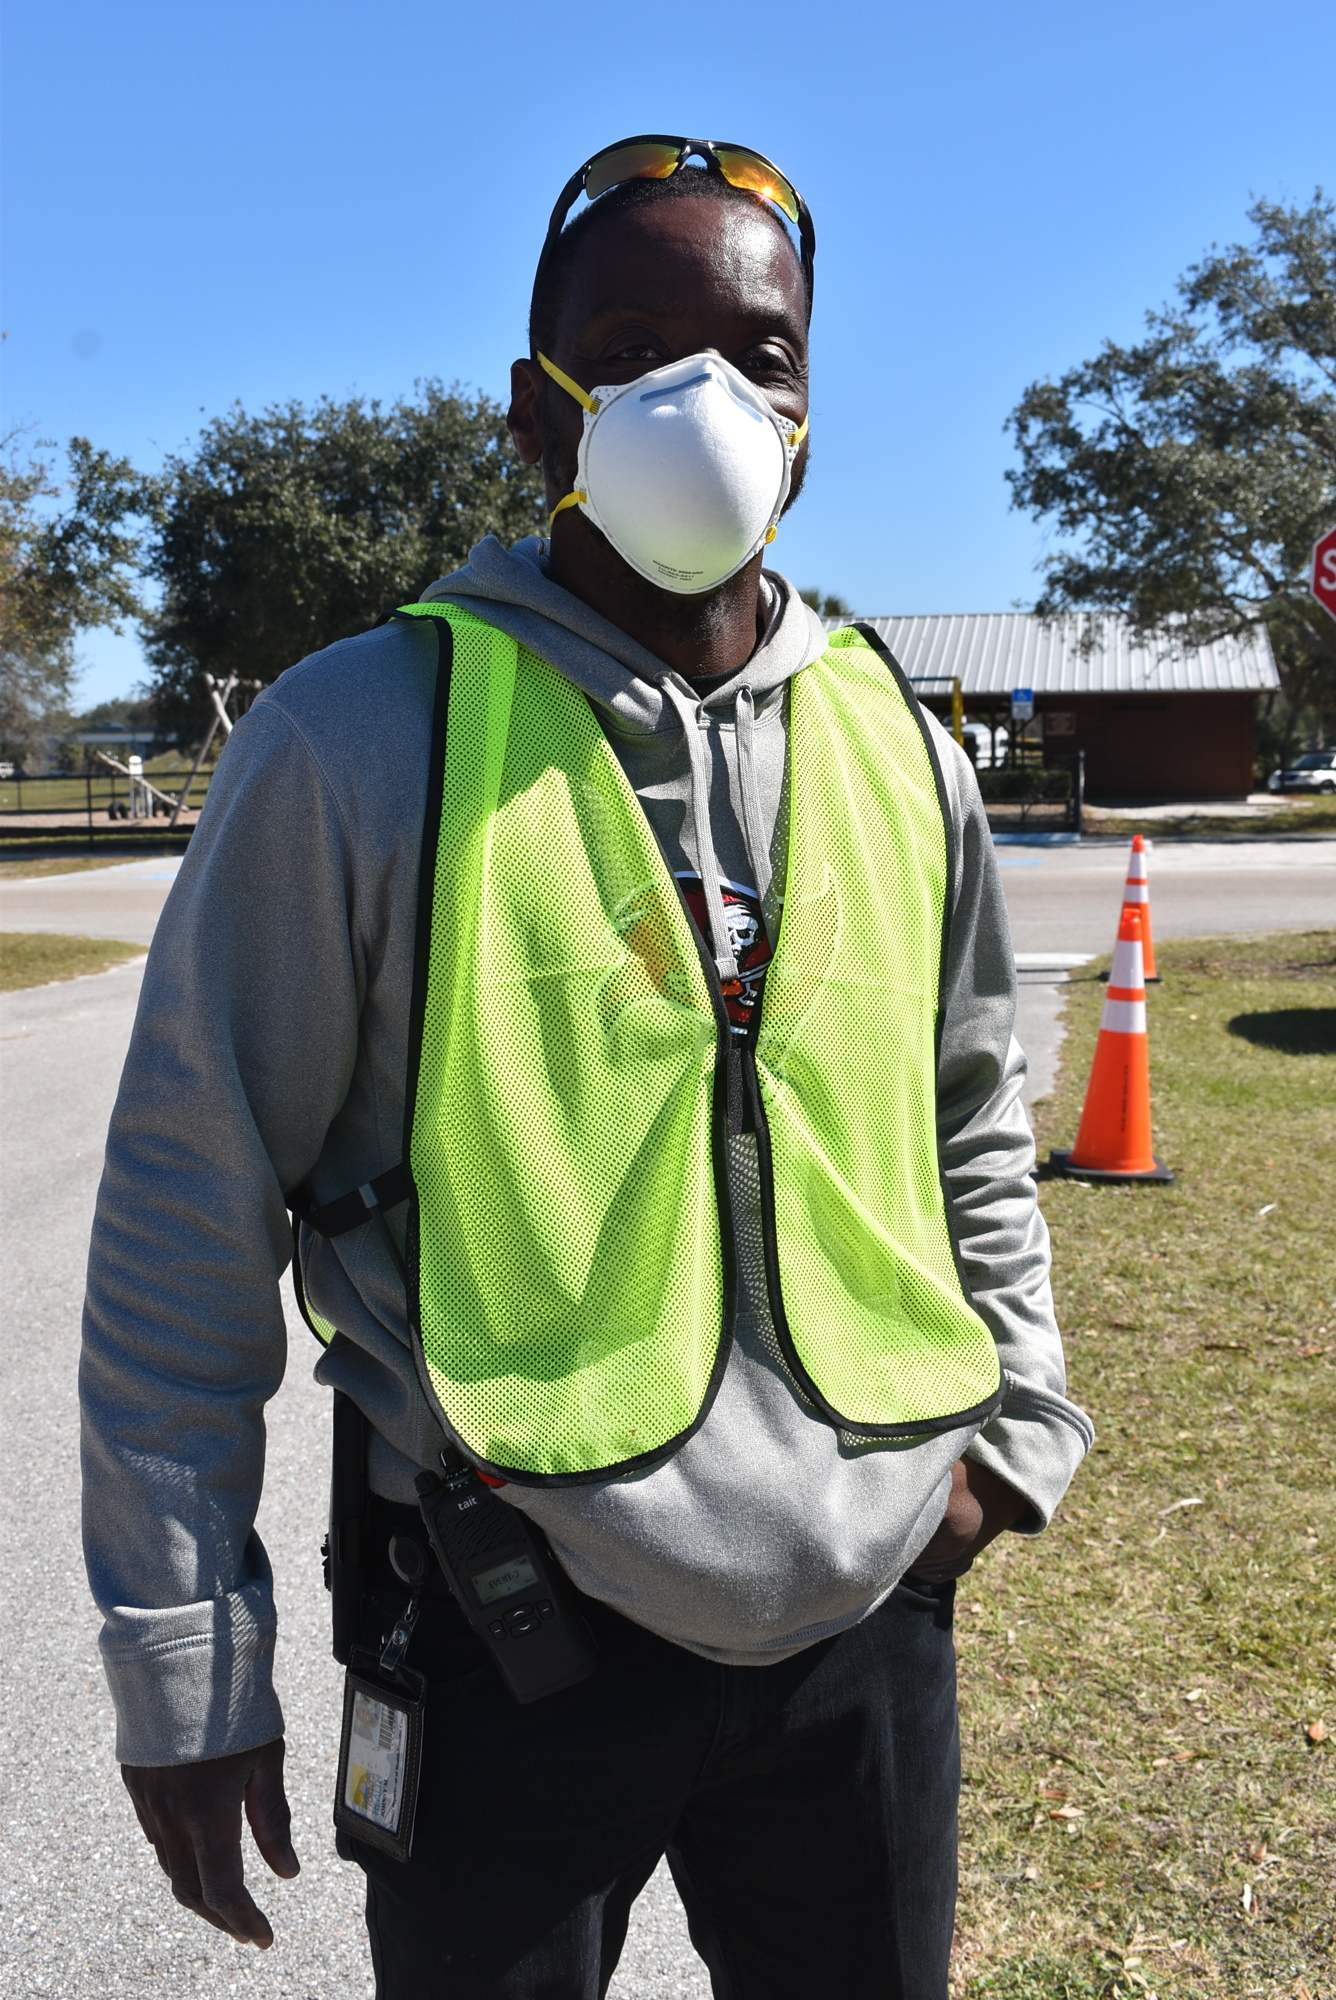 Bradenton native Johnny McKenzie was diagnosed with acute myeloid leukemia June 3, 2019. He volunteered to join the Department of Health's COVID-19 incident management team shortly after returning to work in Jan. 2020.